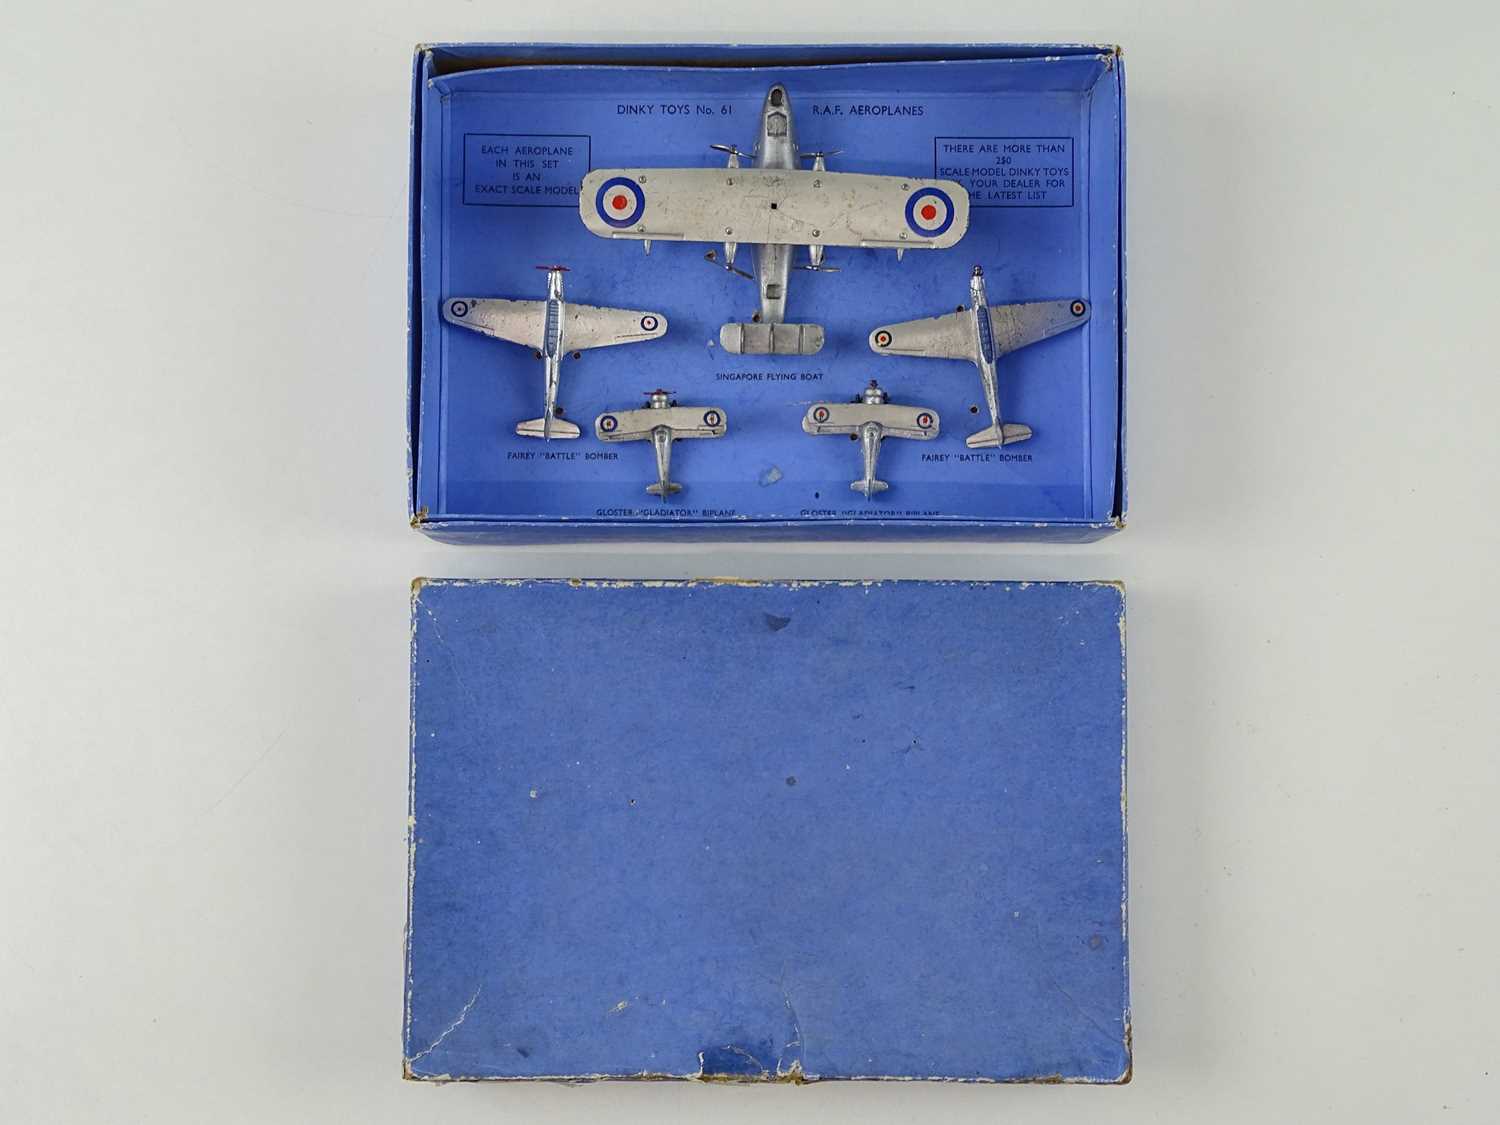 A DINKY Toys pre-war 61 R.A.F Aeroplanes set complete with five models - G in G box